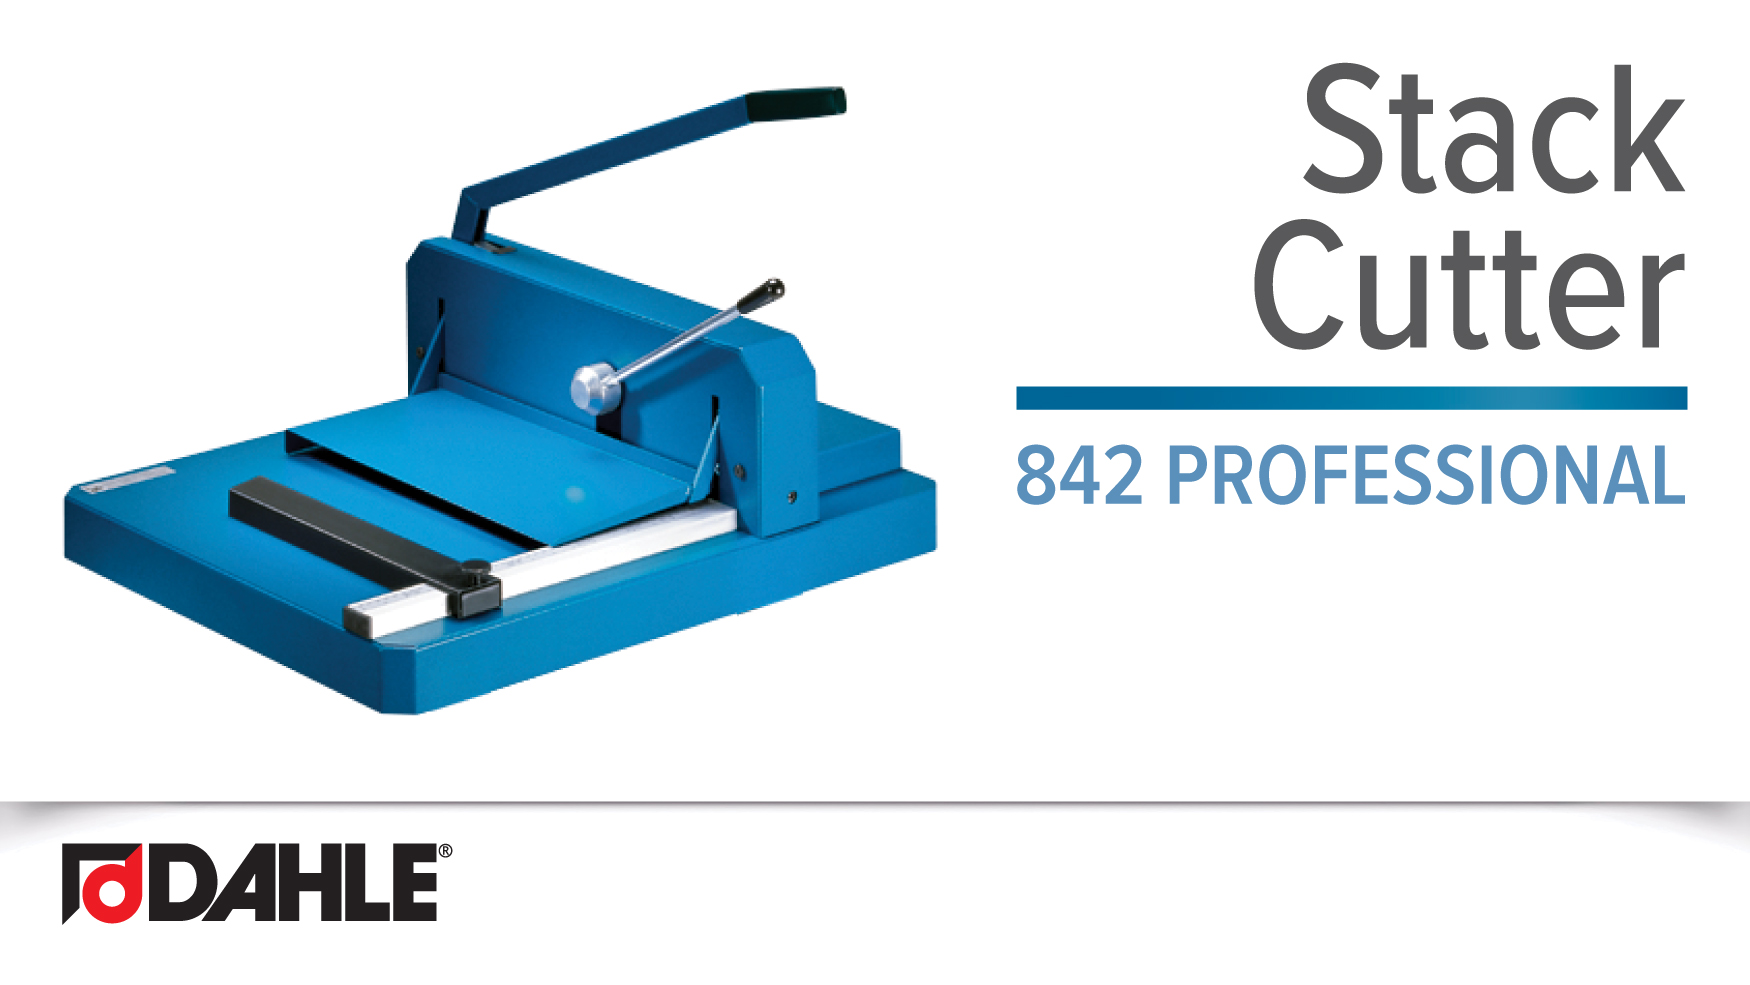 <big><strong>Dahle Stack Cutters</strong></big><br>Professional Series